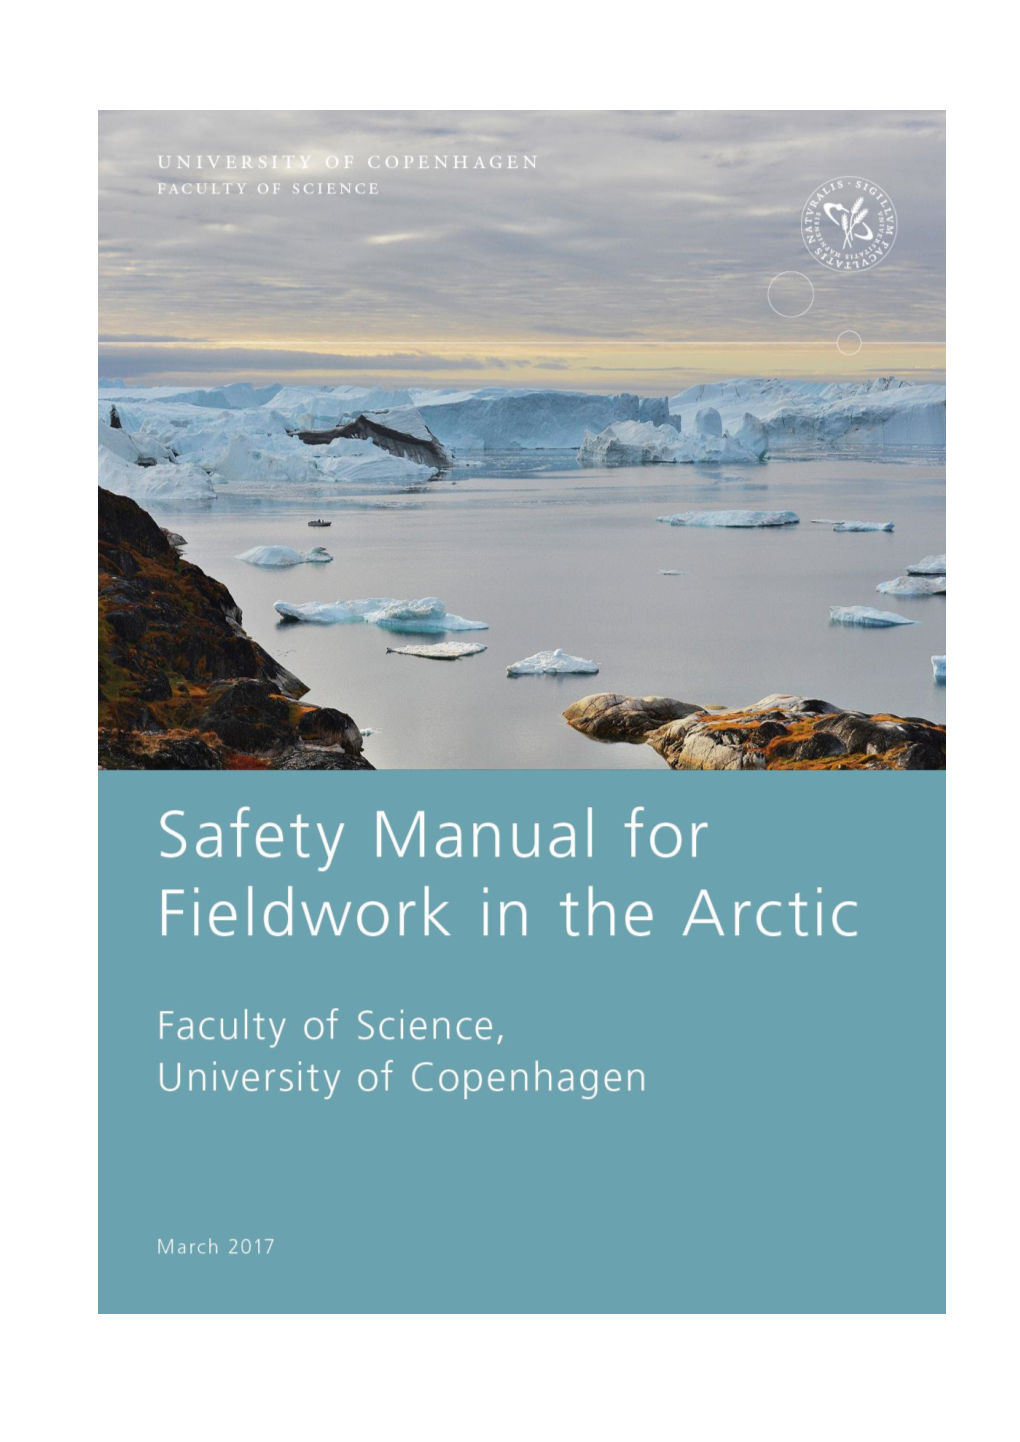 Safety Manual for Fieldwork in the Arctic, Faculty of Science, University